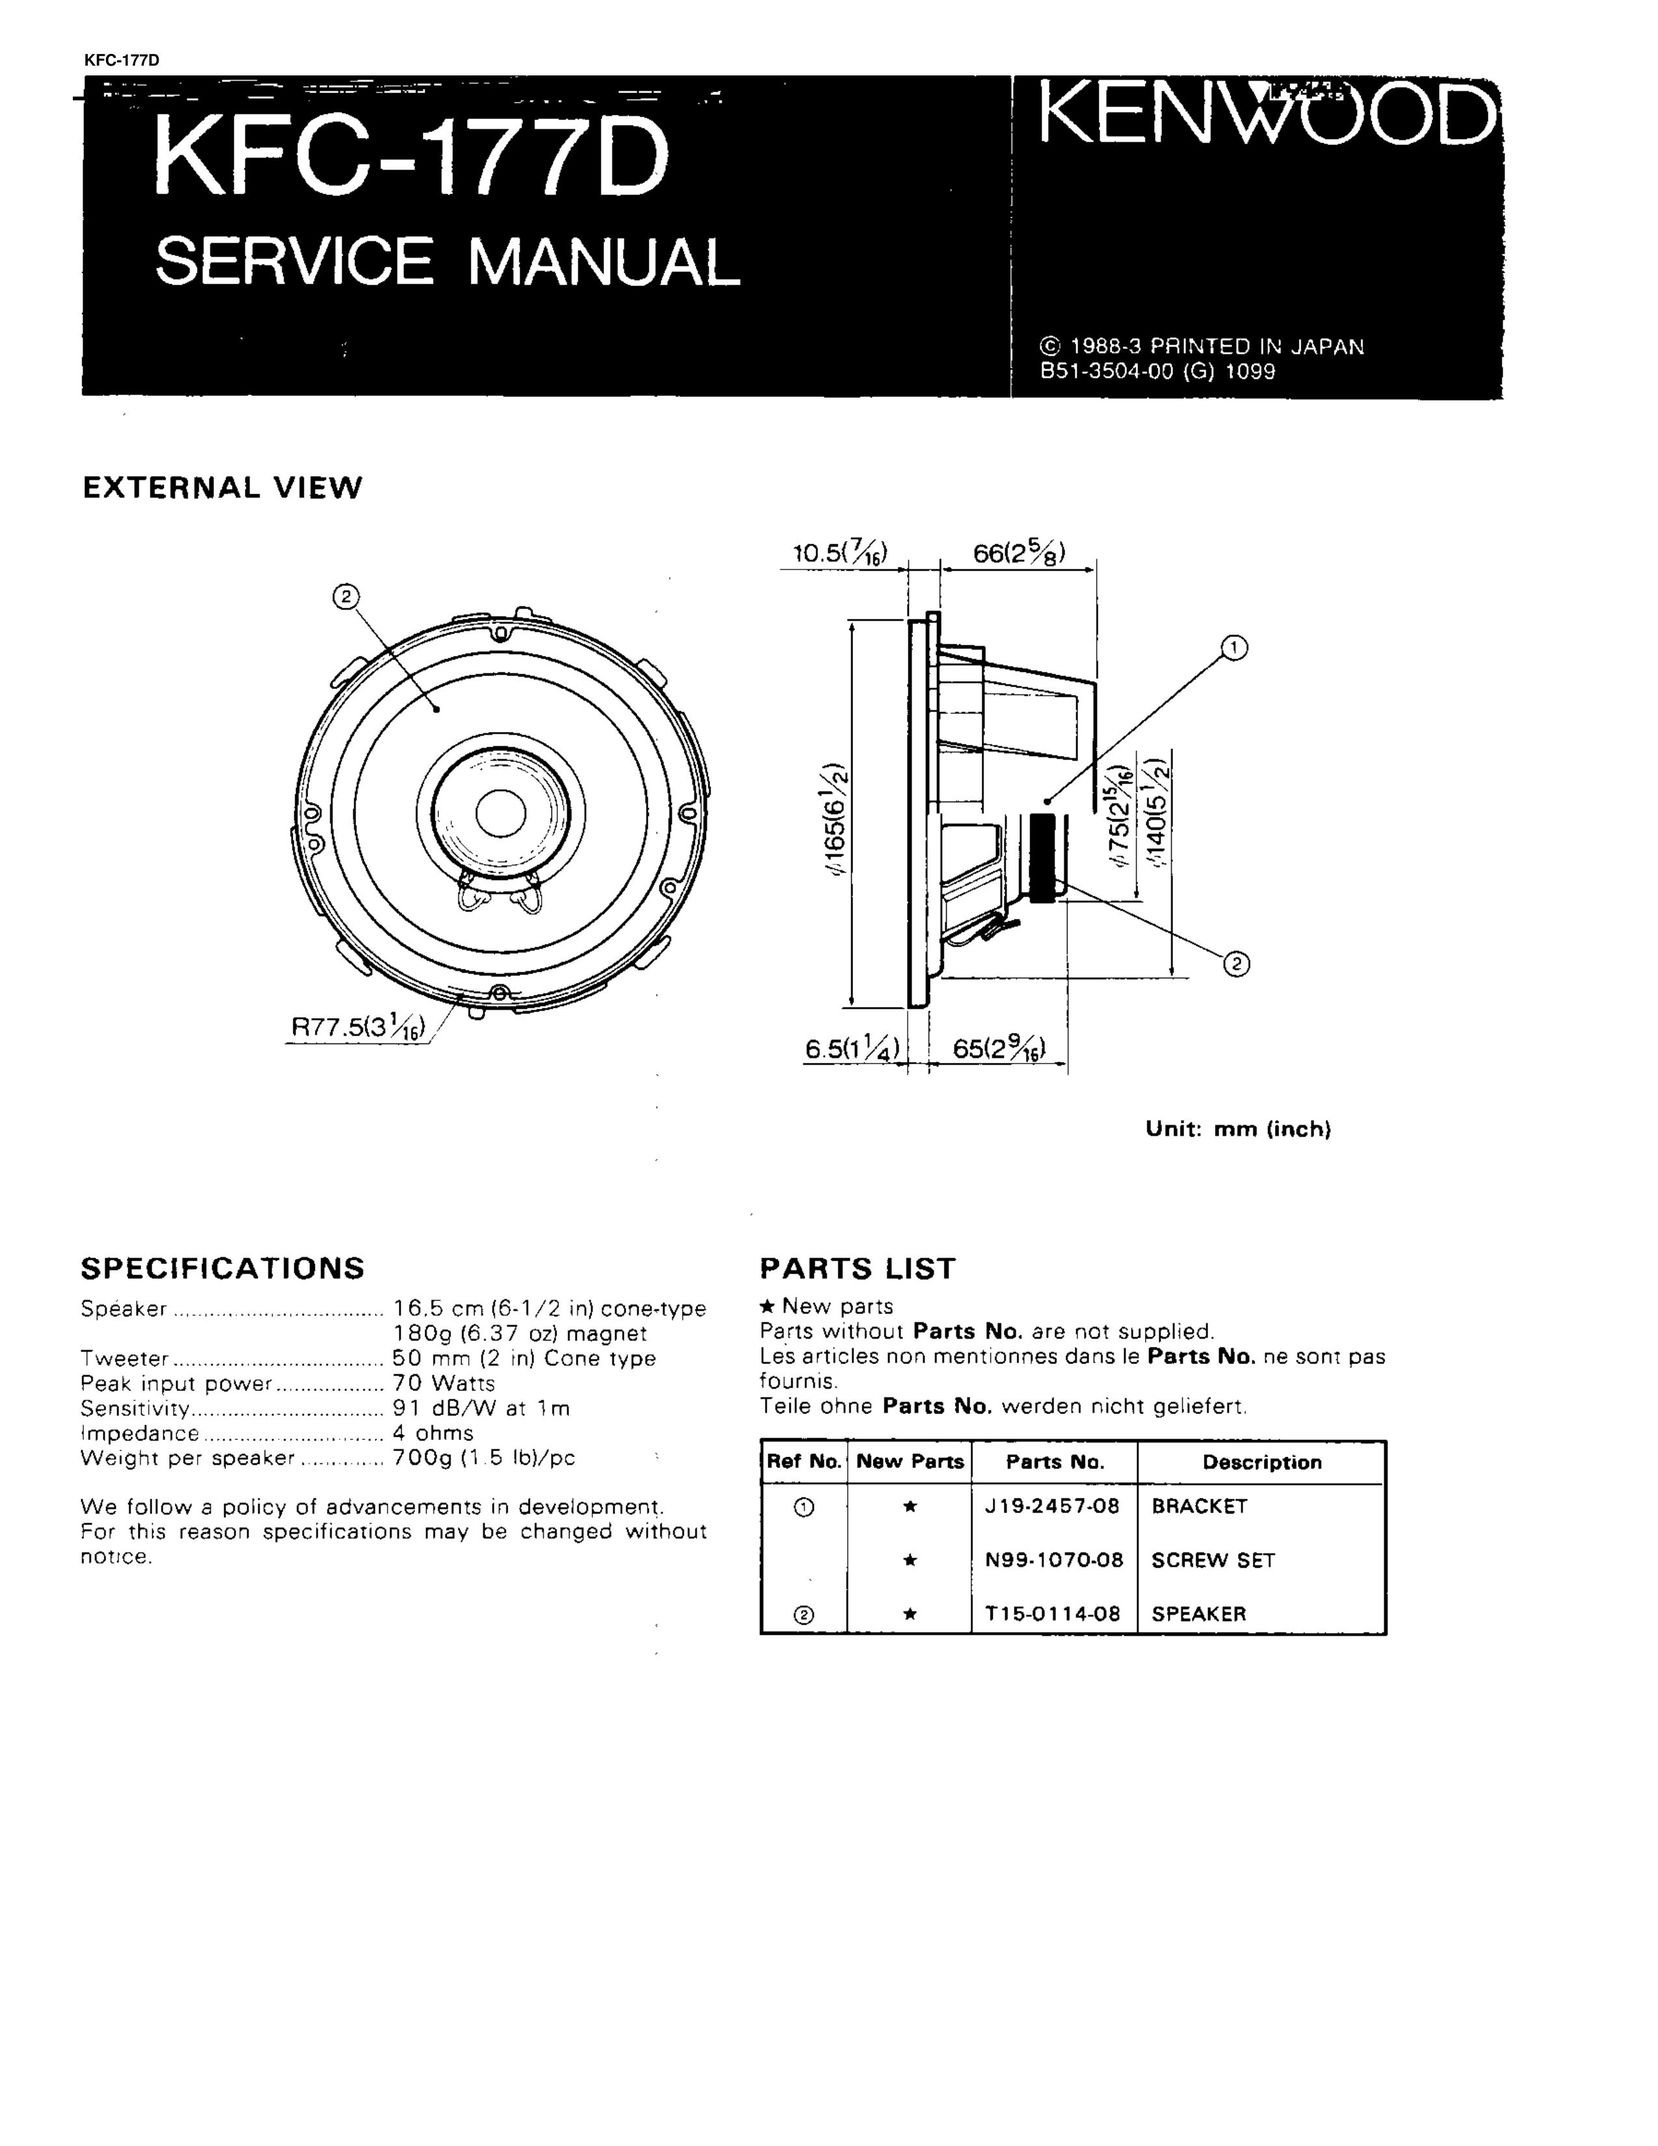 Kenwood KFC-177D Home Theater System User Manual